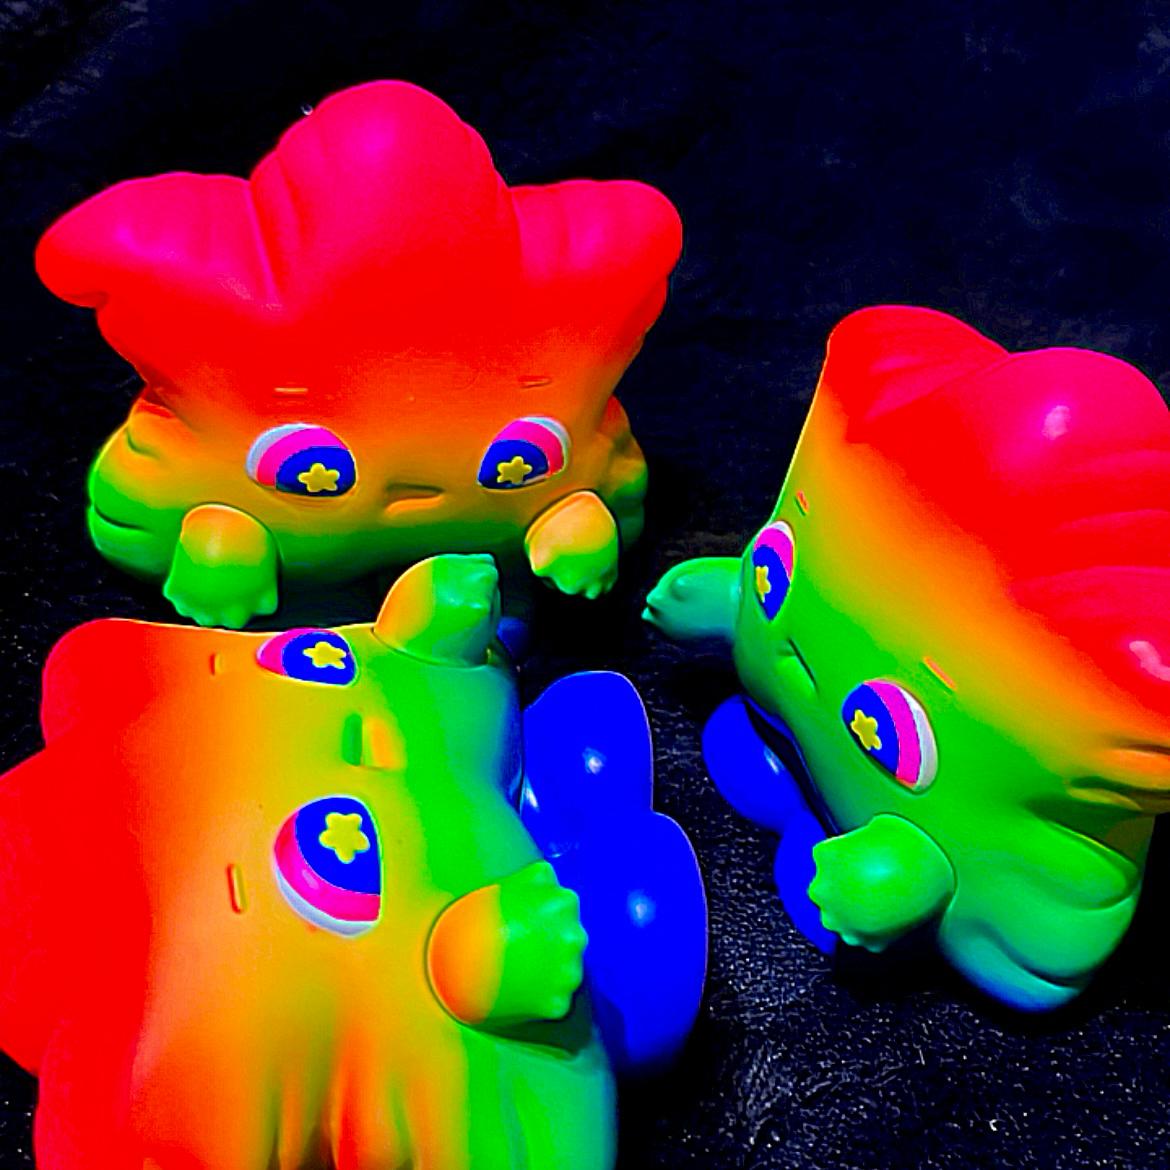 Rainbow Weee baby toy animal with rainbow face and eyes, colorful plastic toys in group.